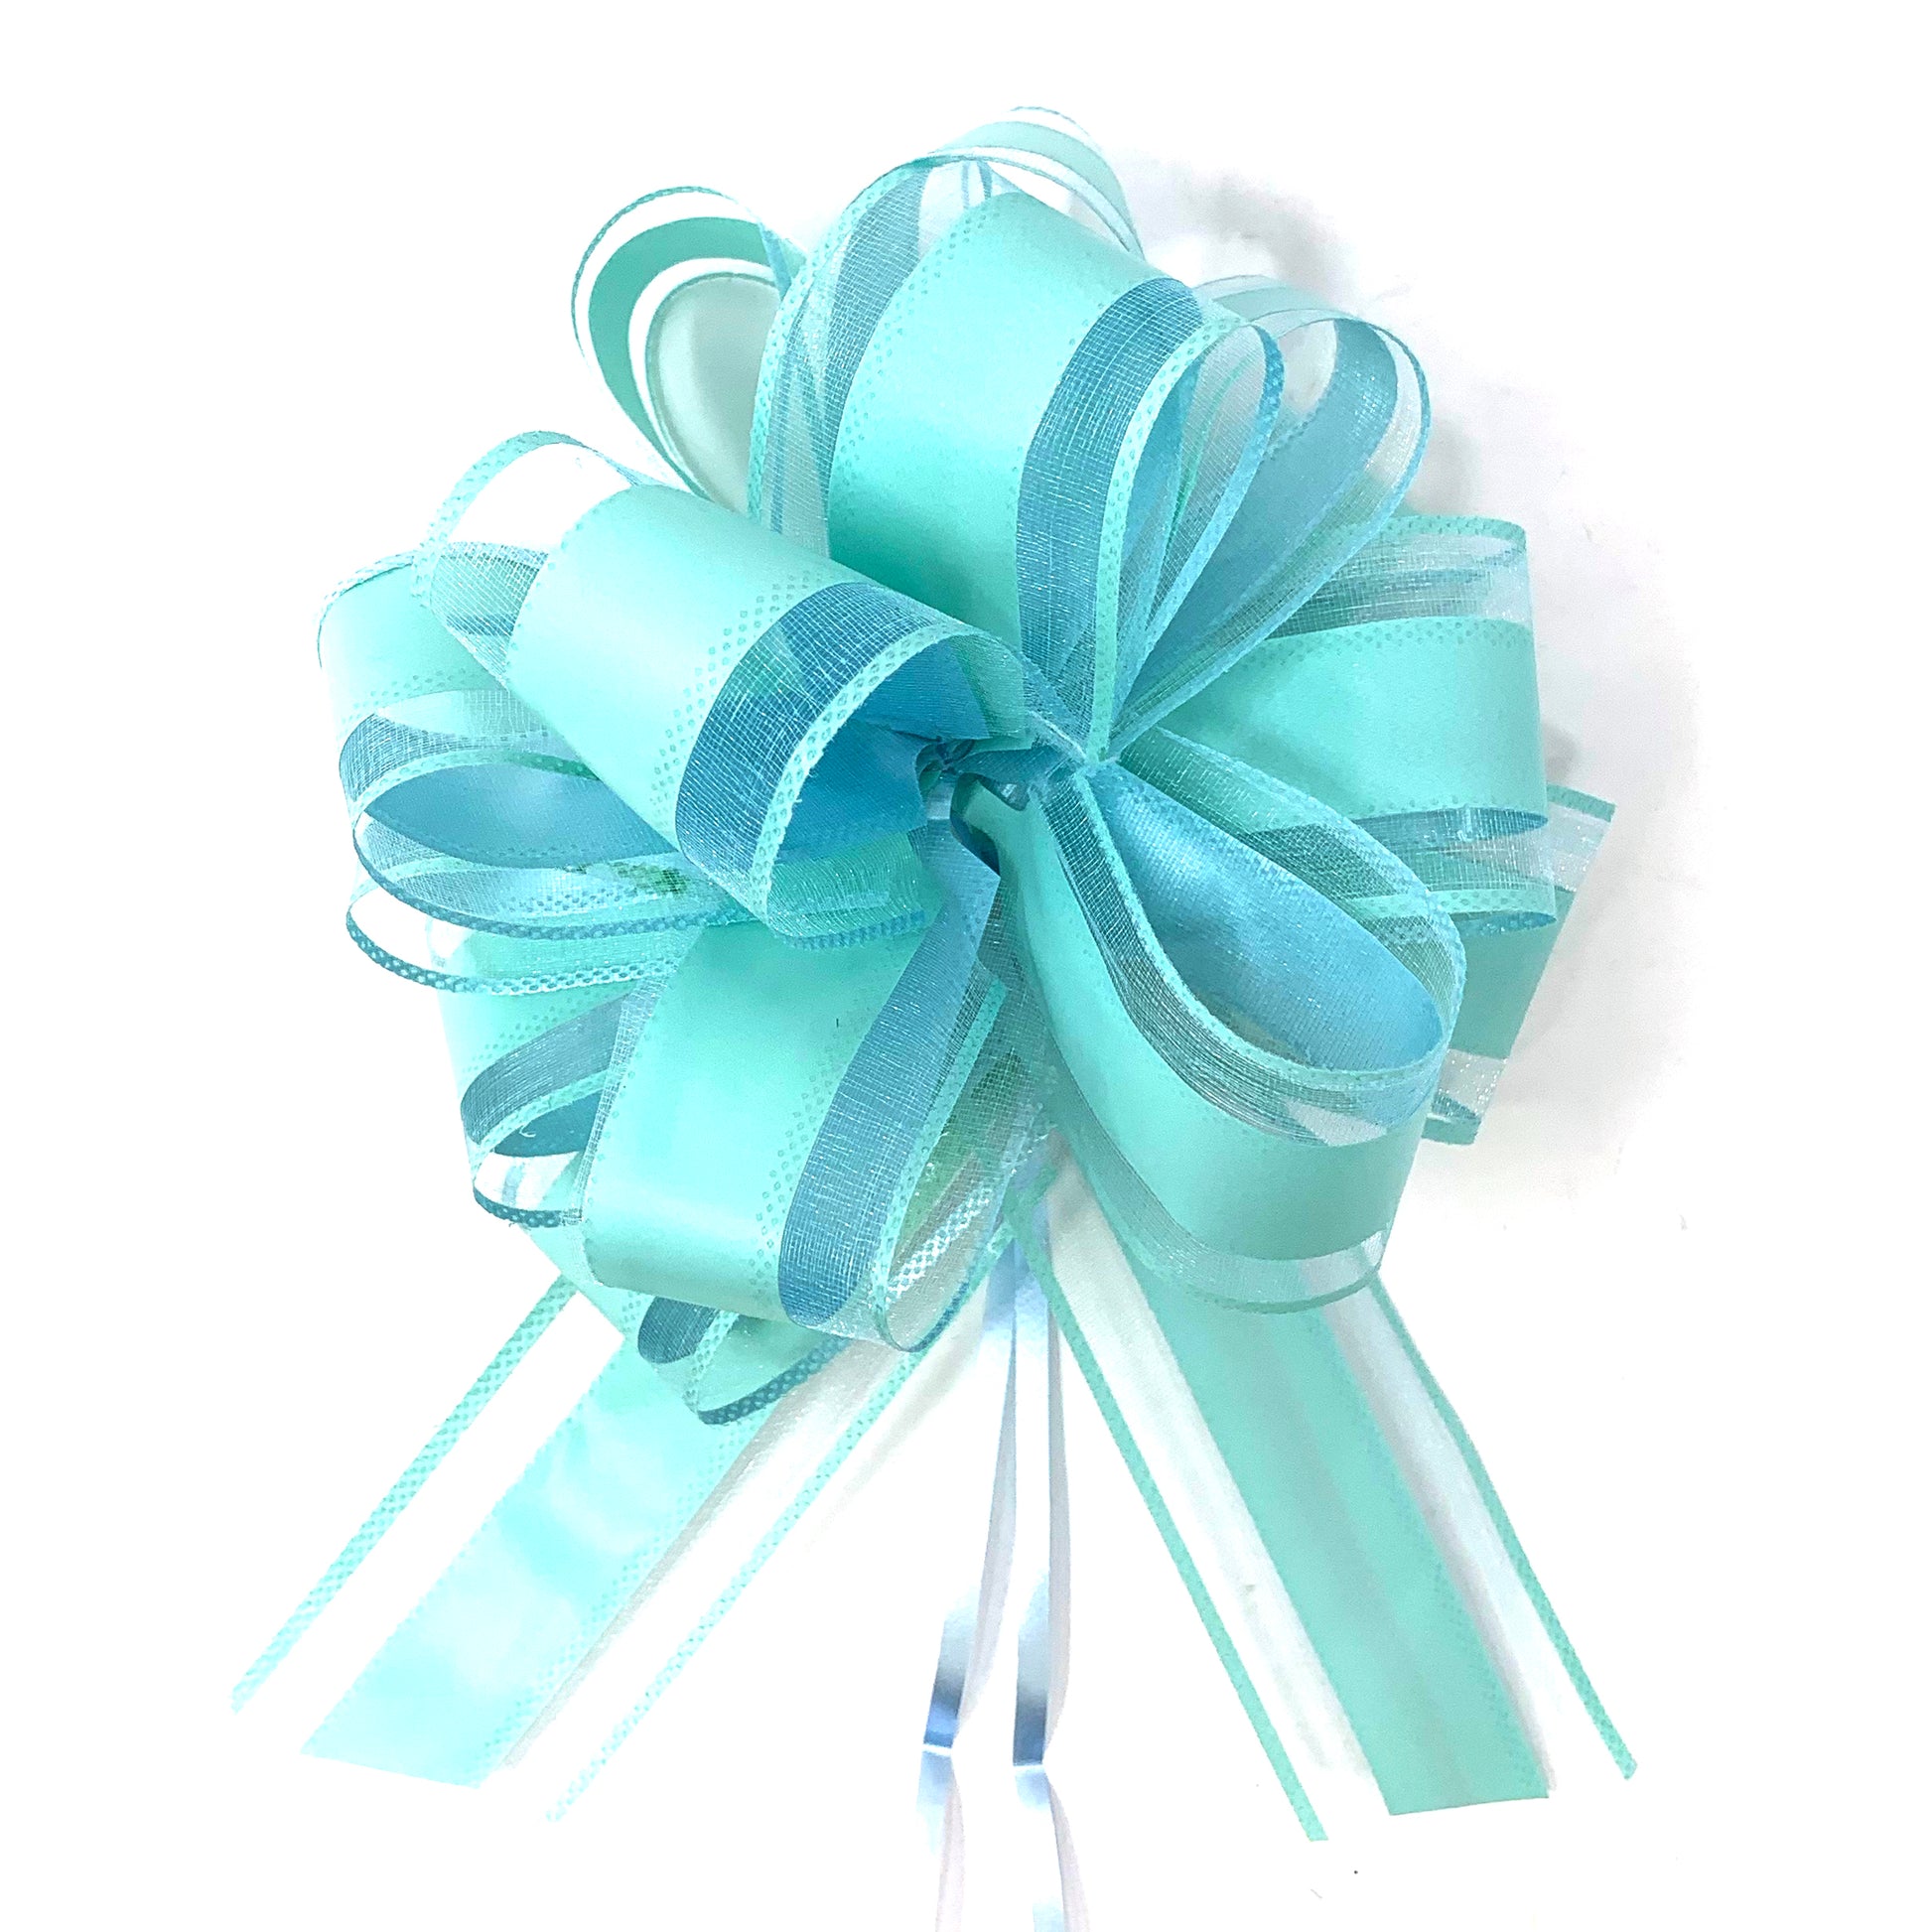 Cute 42pcs Gold Silver Green Teal and Babyblue Gift Bows